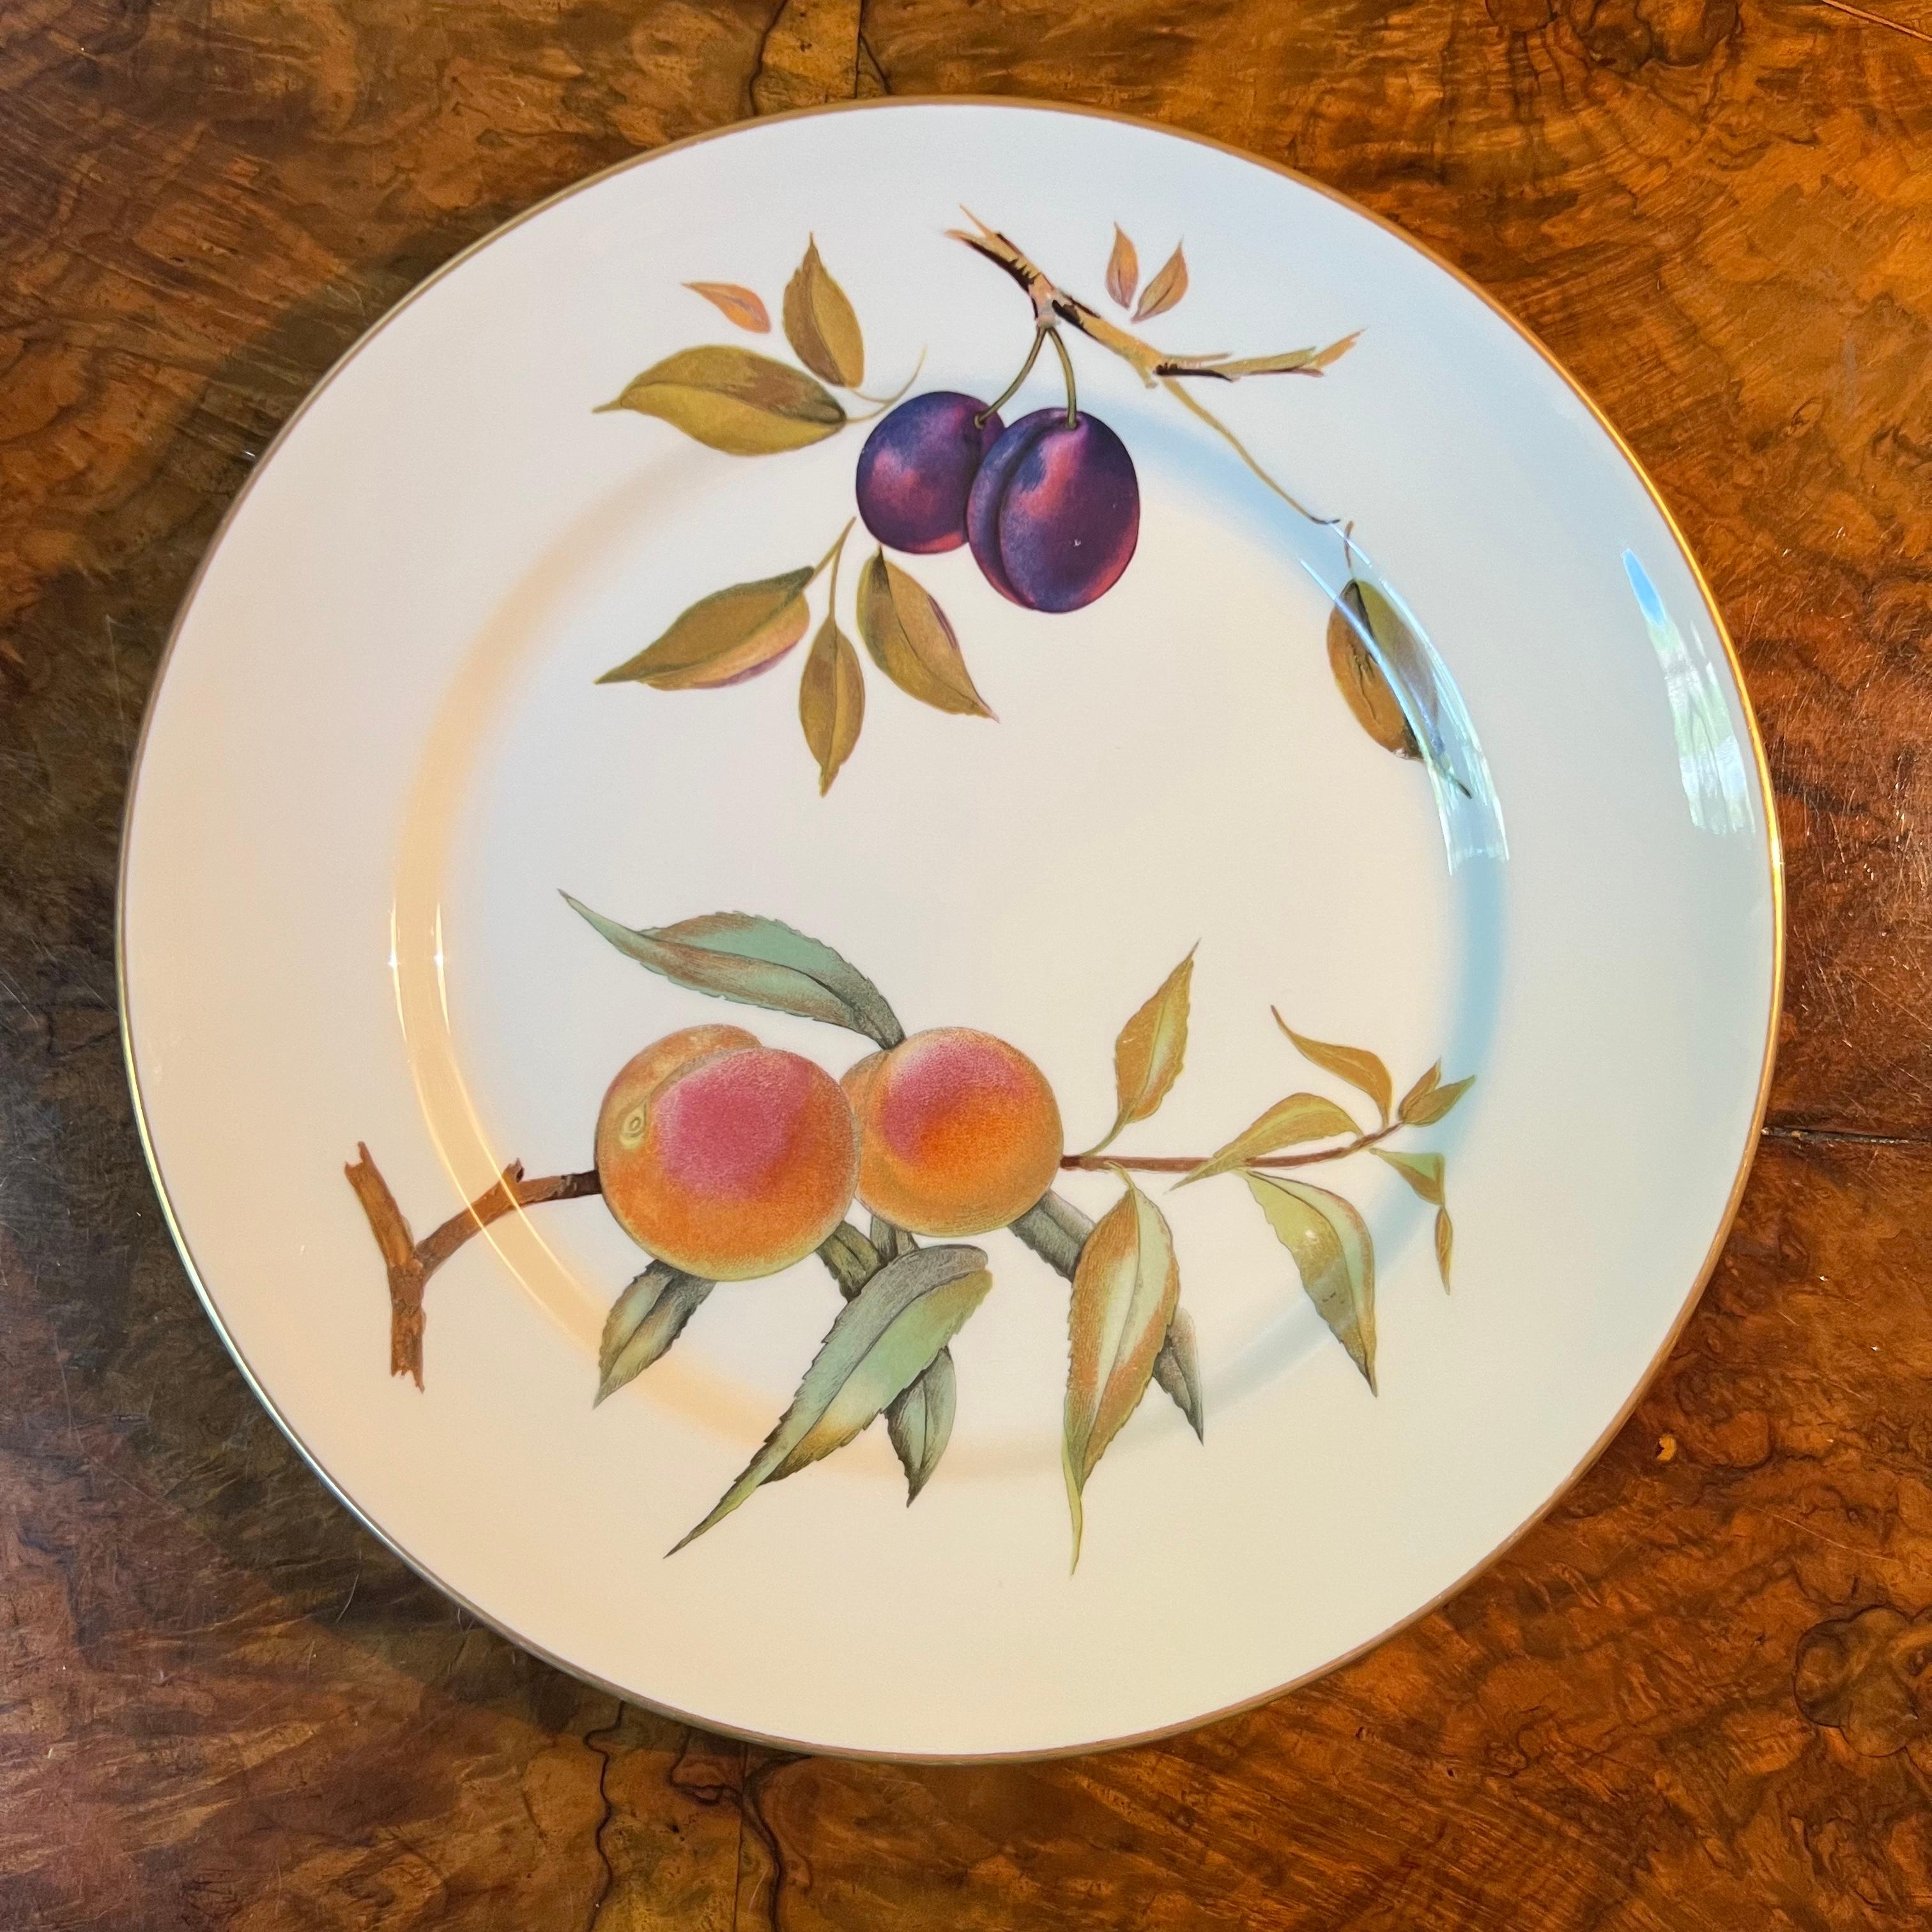 Fruit print with gold trim, some ware to print and gold trim, stamped Royal Worcester Evesham

Circa: 1990s

Material: Porcelain 

Country Of Origin: England 

Measurements: 3cm high, 25.5cm diameter 

Postage via Australia Post with tracking